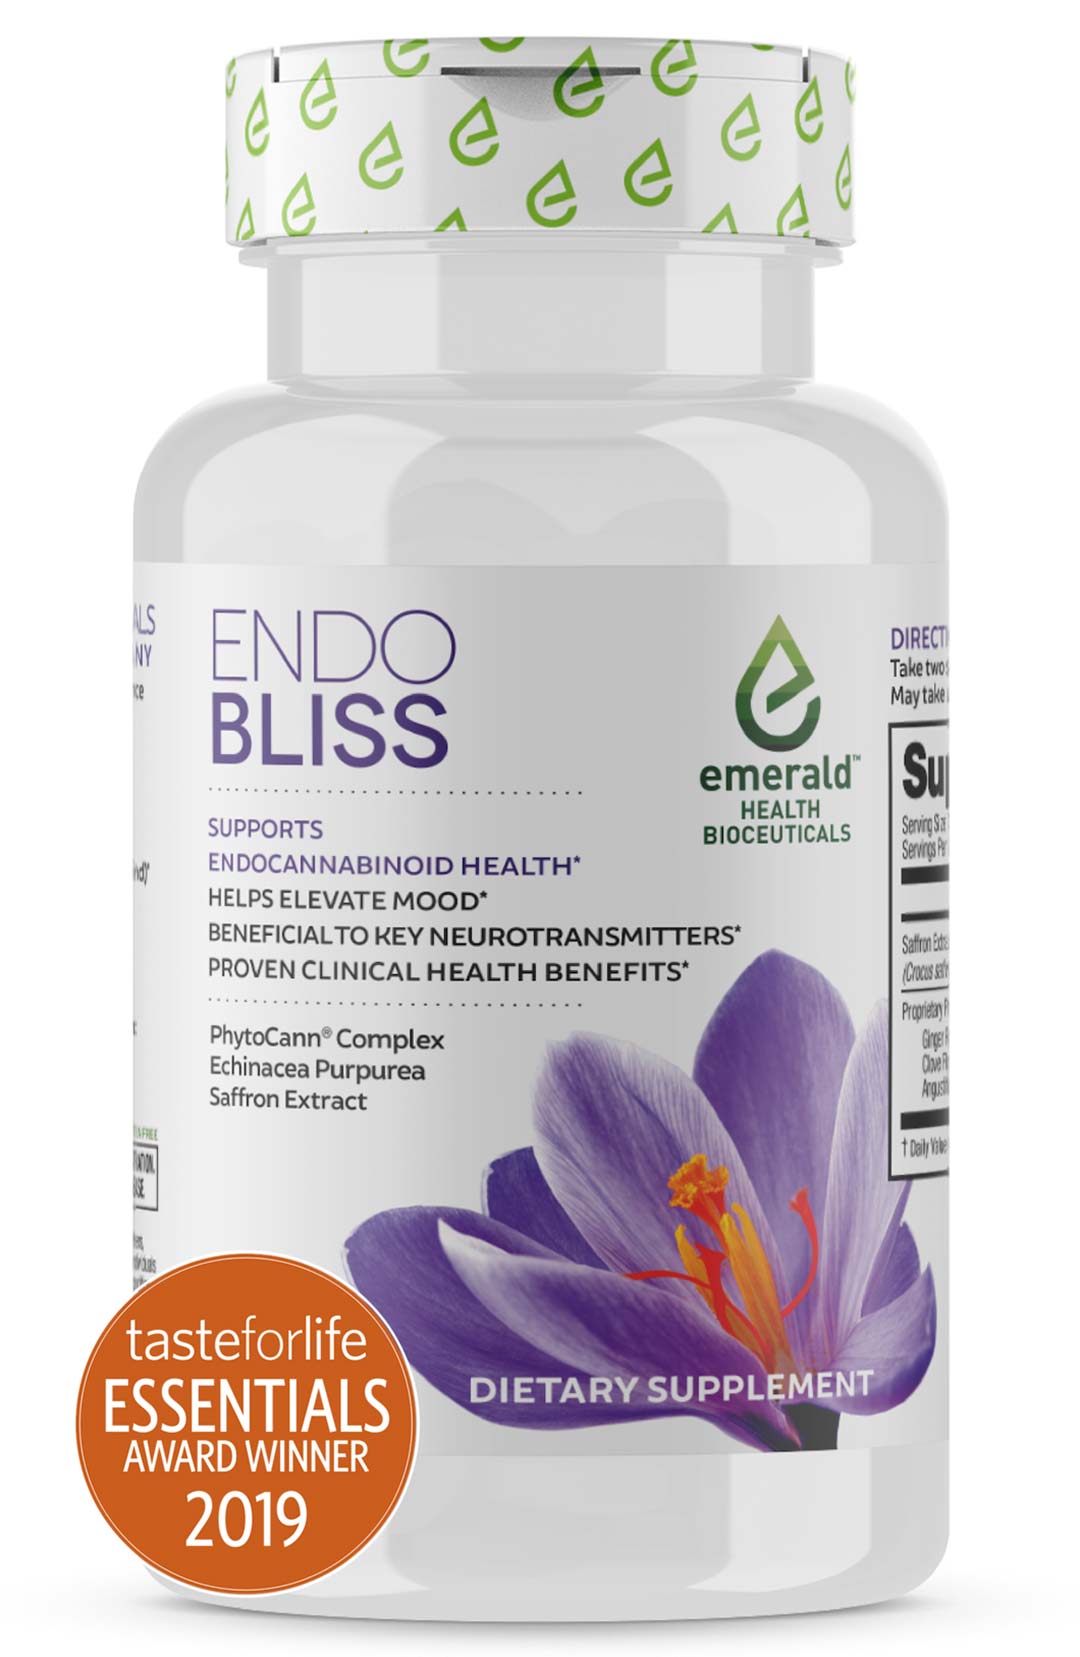 a bottle of Endo Bliss over-the counter 